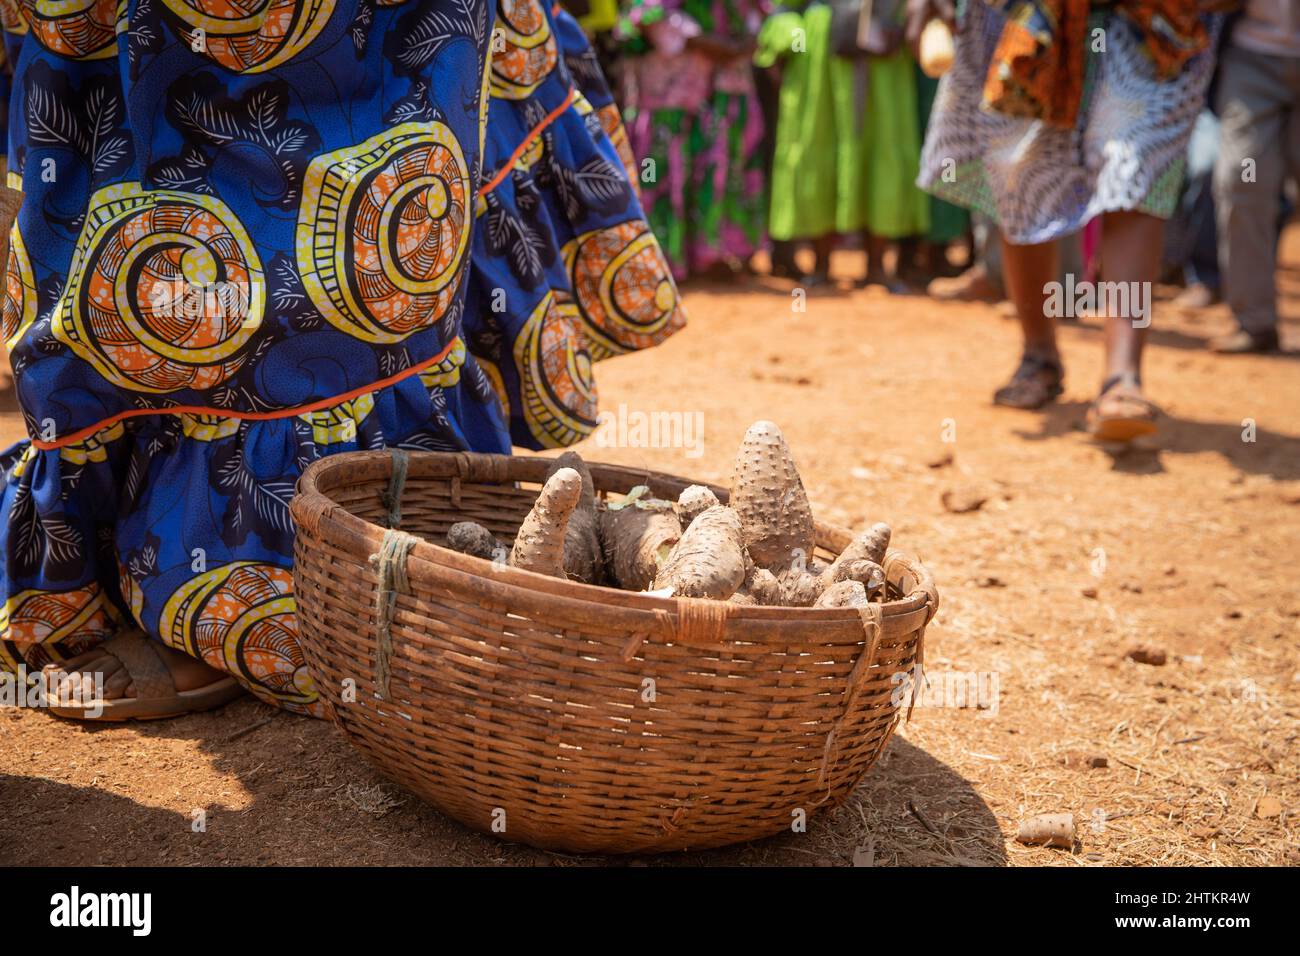 Close-up of a basket containing Yam, a tuber, at a celebration in Cameroon, Africa Stock Photo